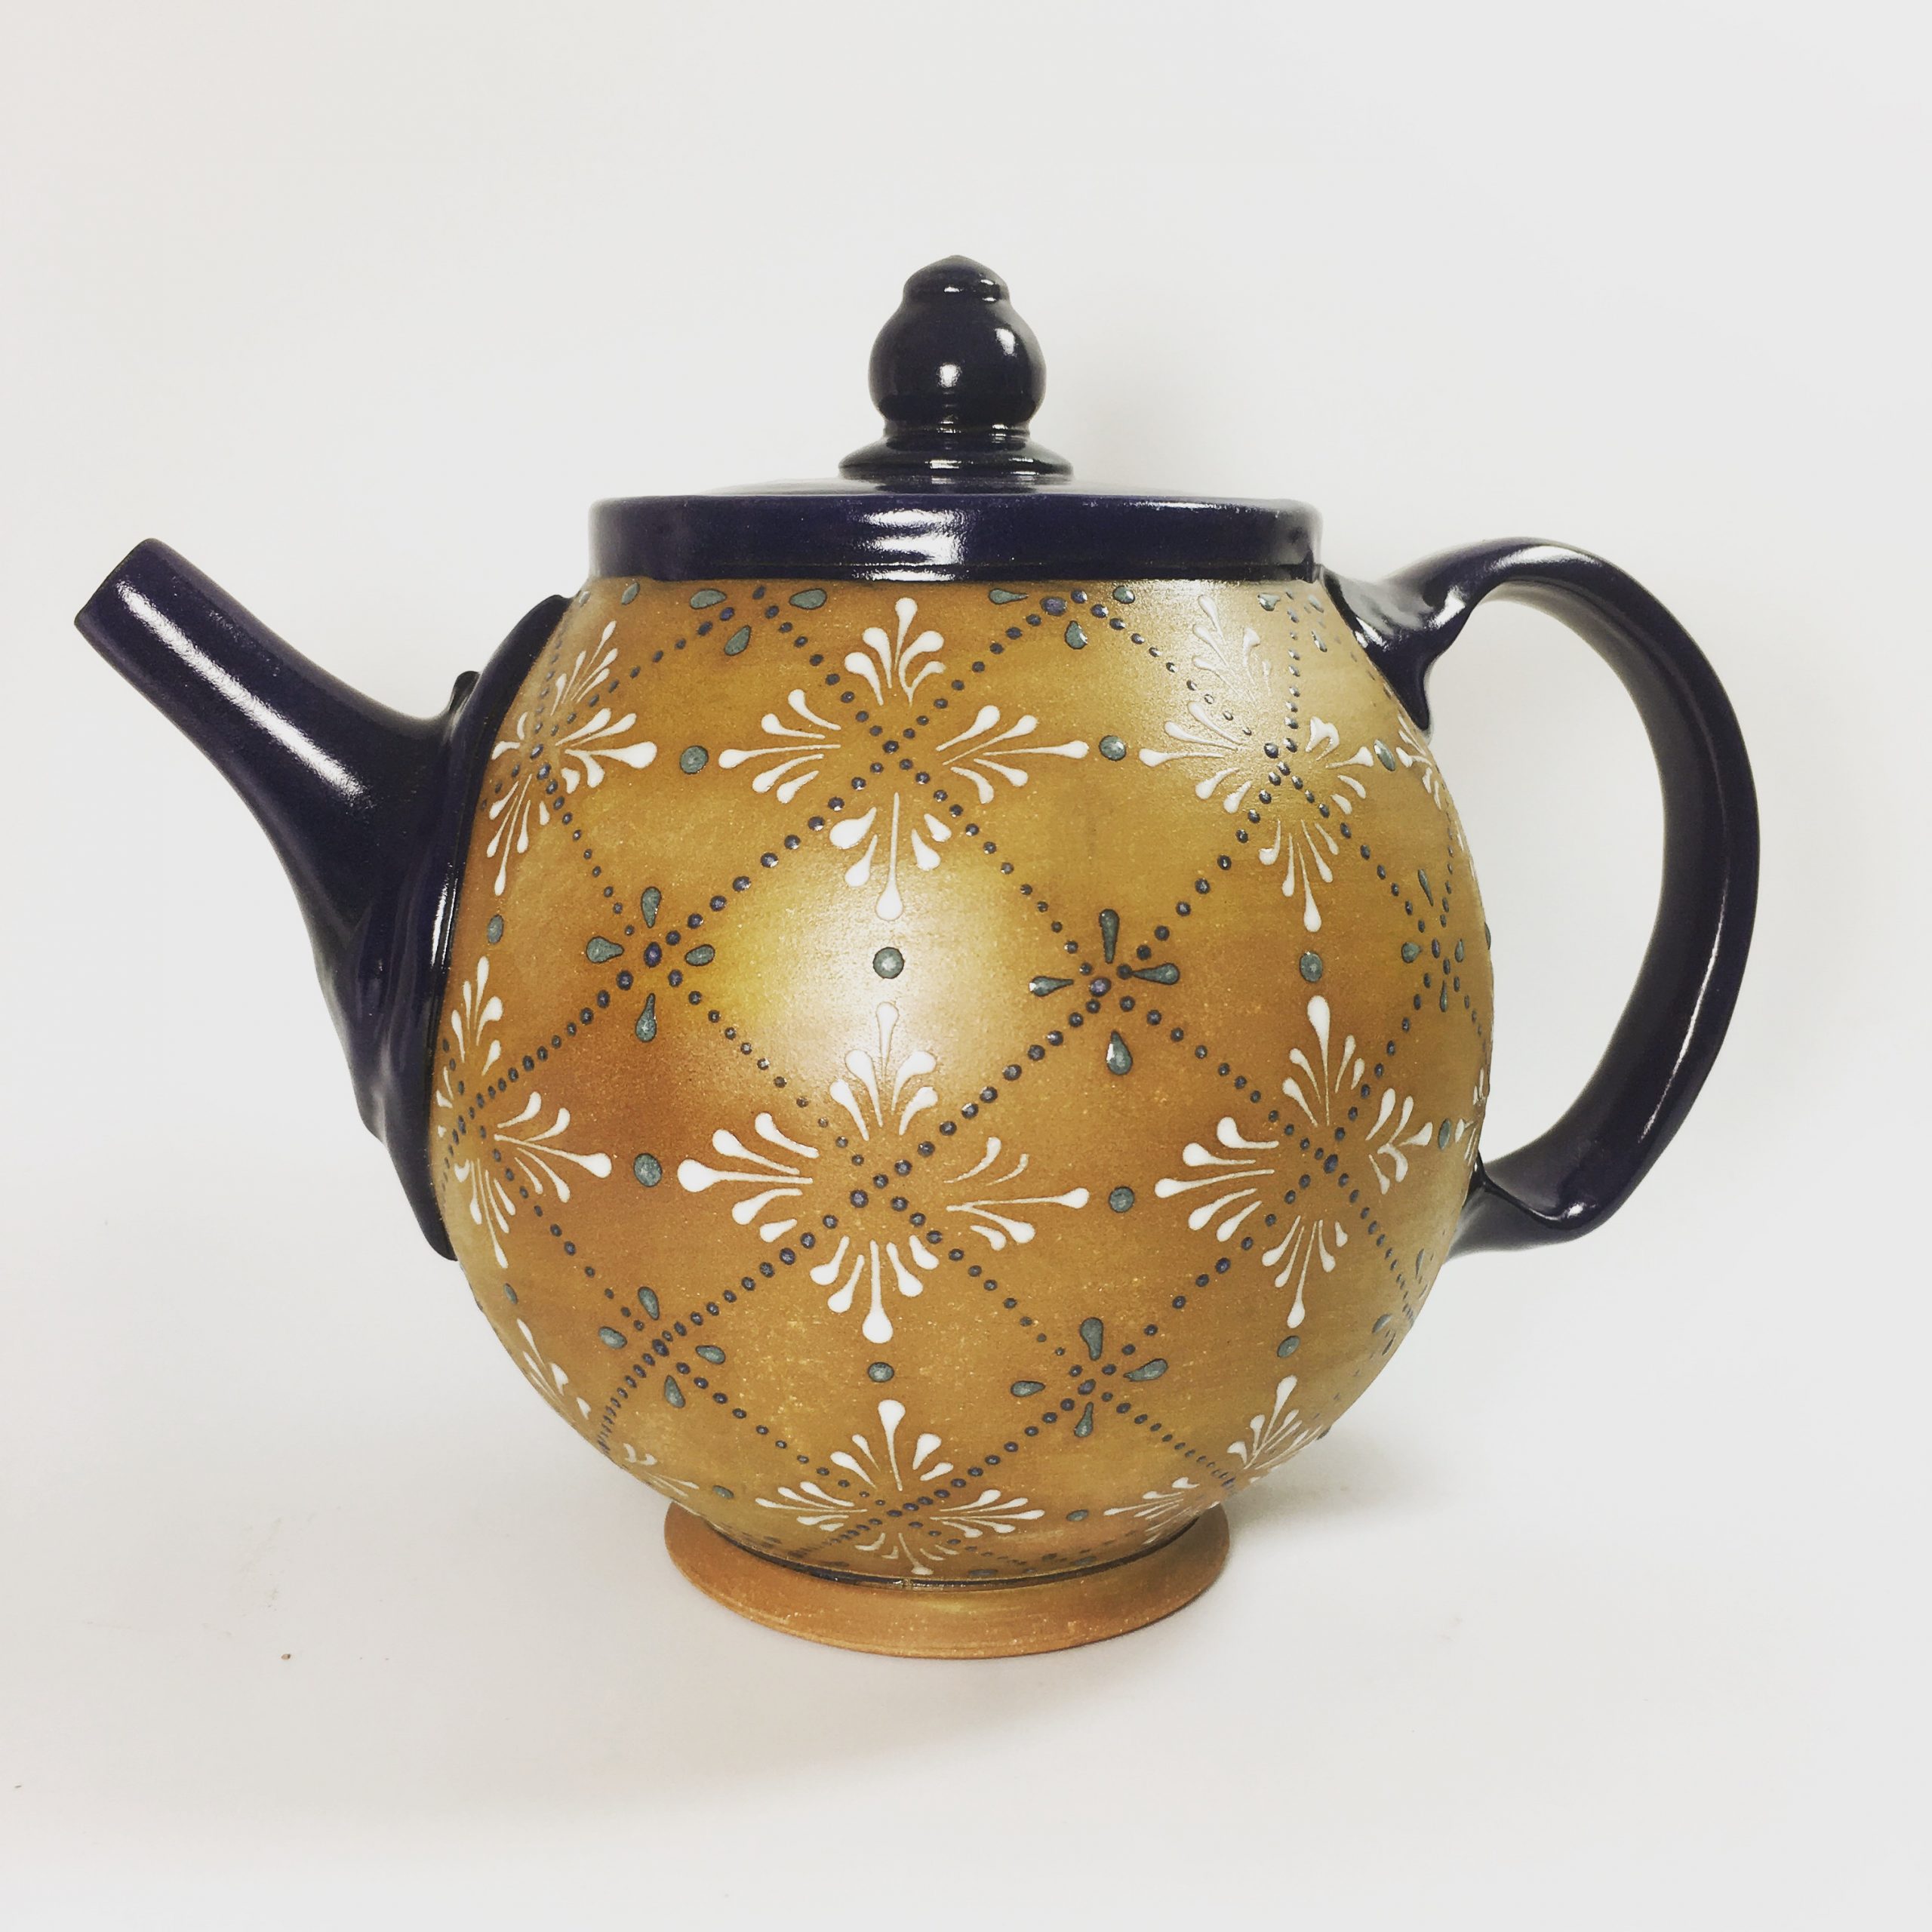 Hannah Graeper Carver, Cobalt Teapot, 7 in. (18 cm) in height, brown stoneware, fired to cone 6 in an electric kiln